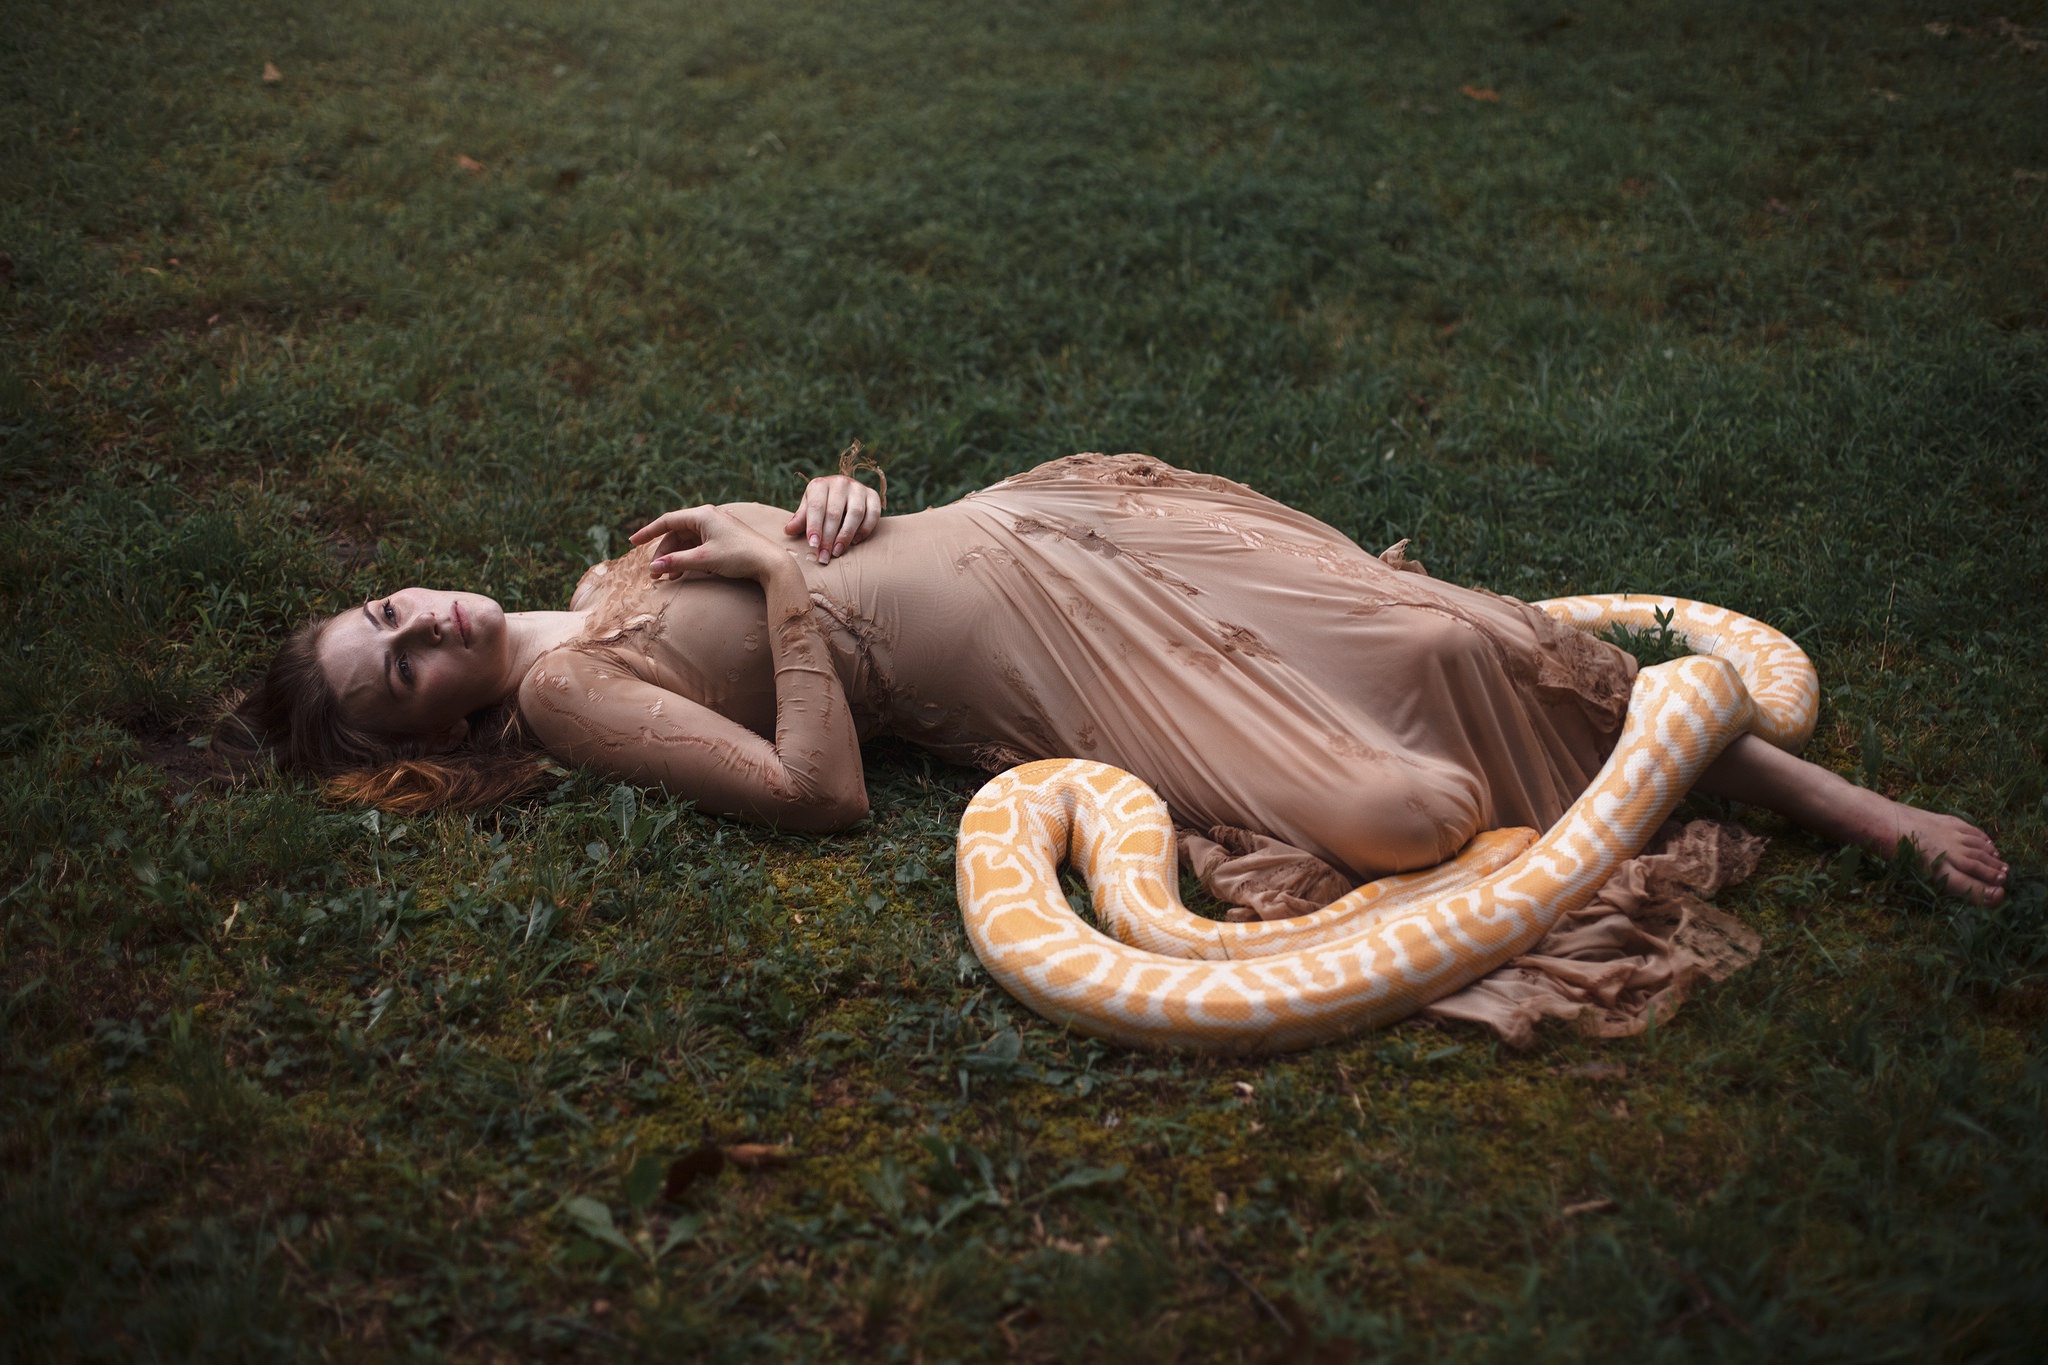 Free photo A woman was bitten by a large snake